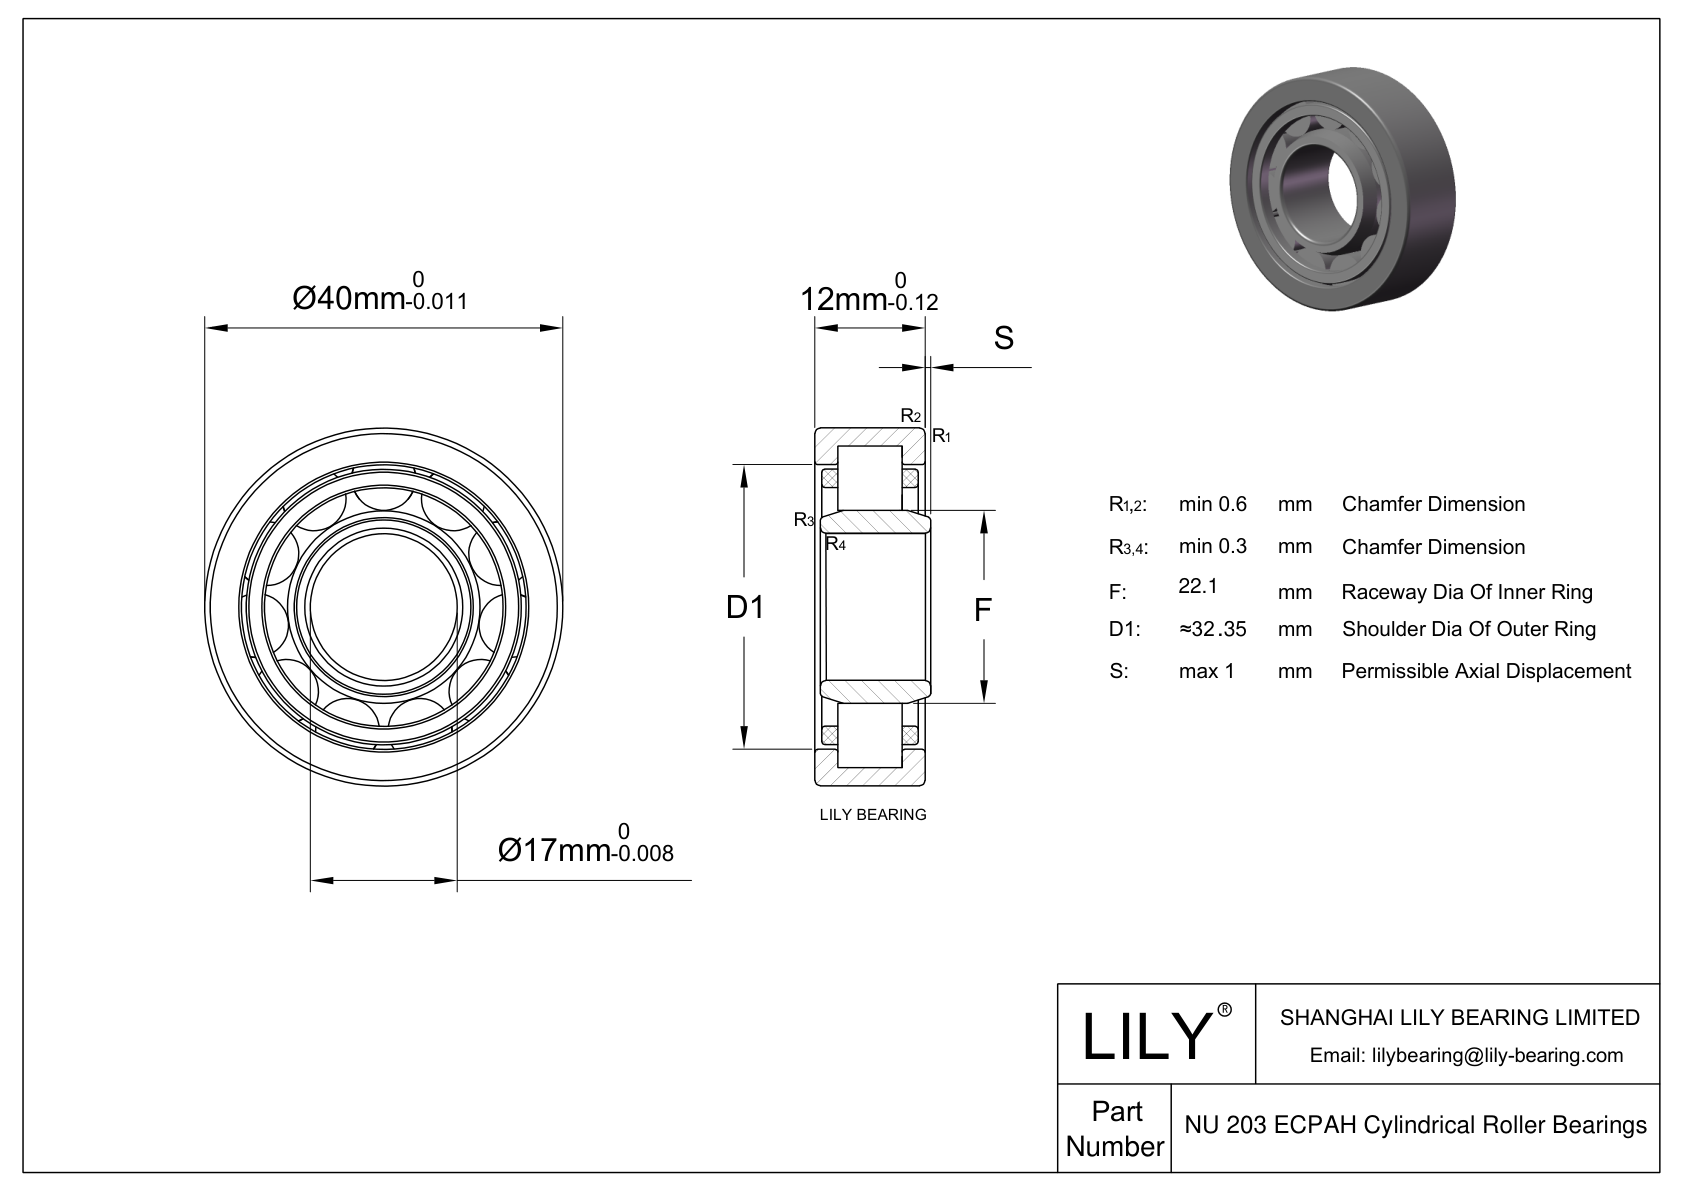 NU 203 ECPHA Single Row Cylindrical Roller Bearings With Inner Ring cad drawing